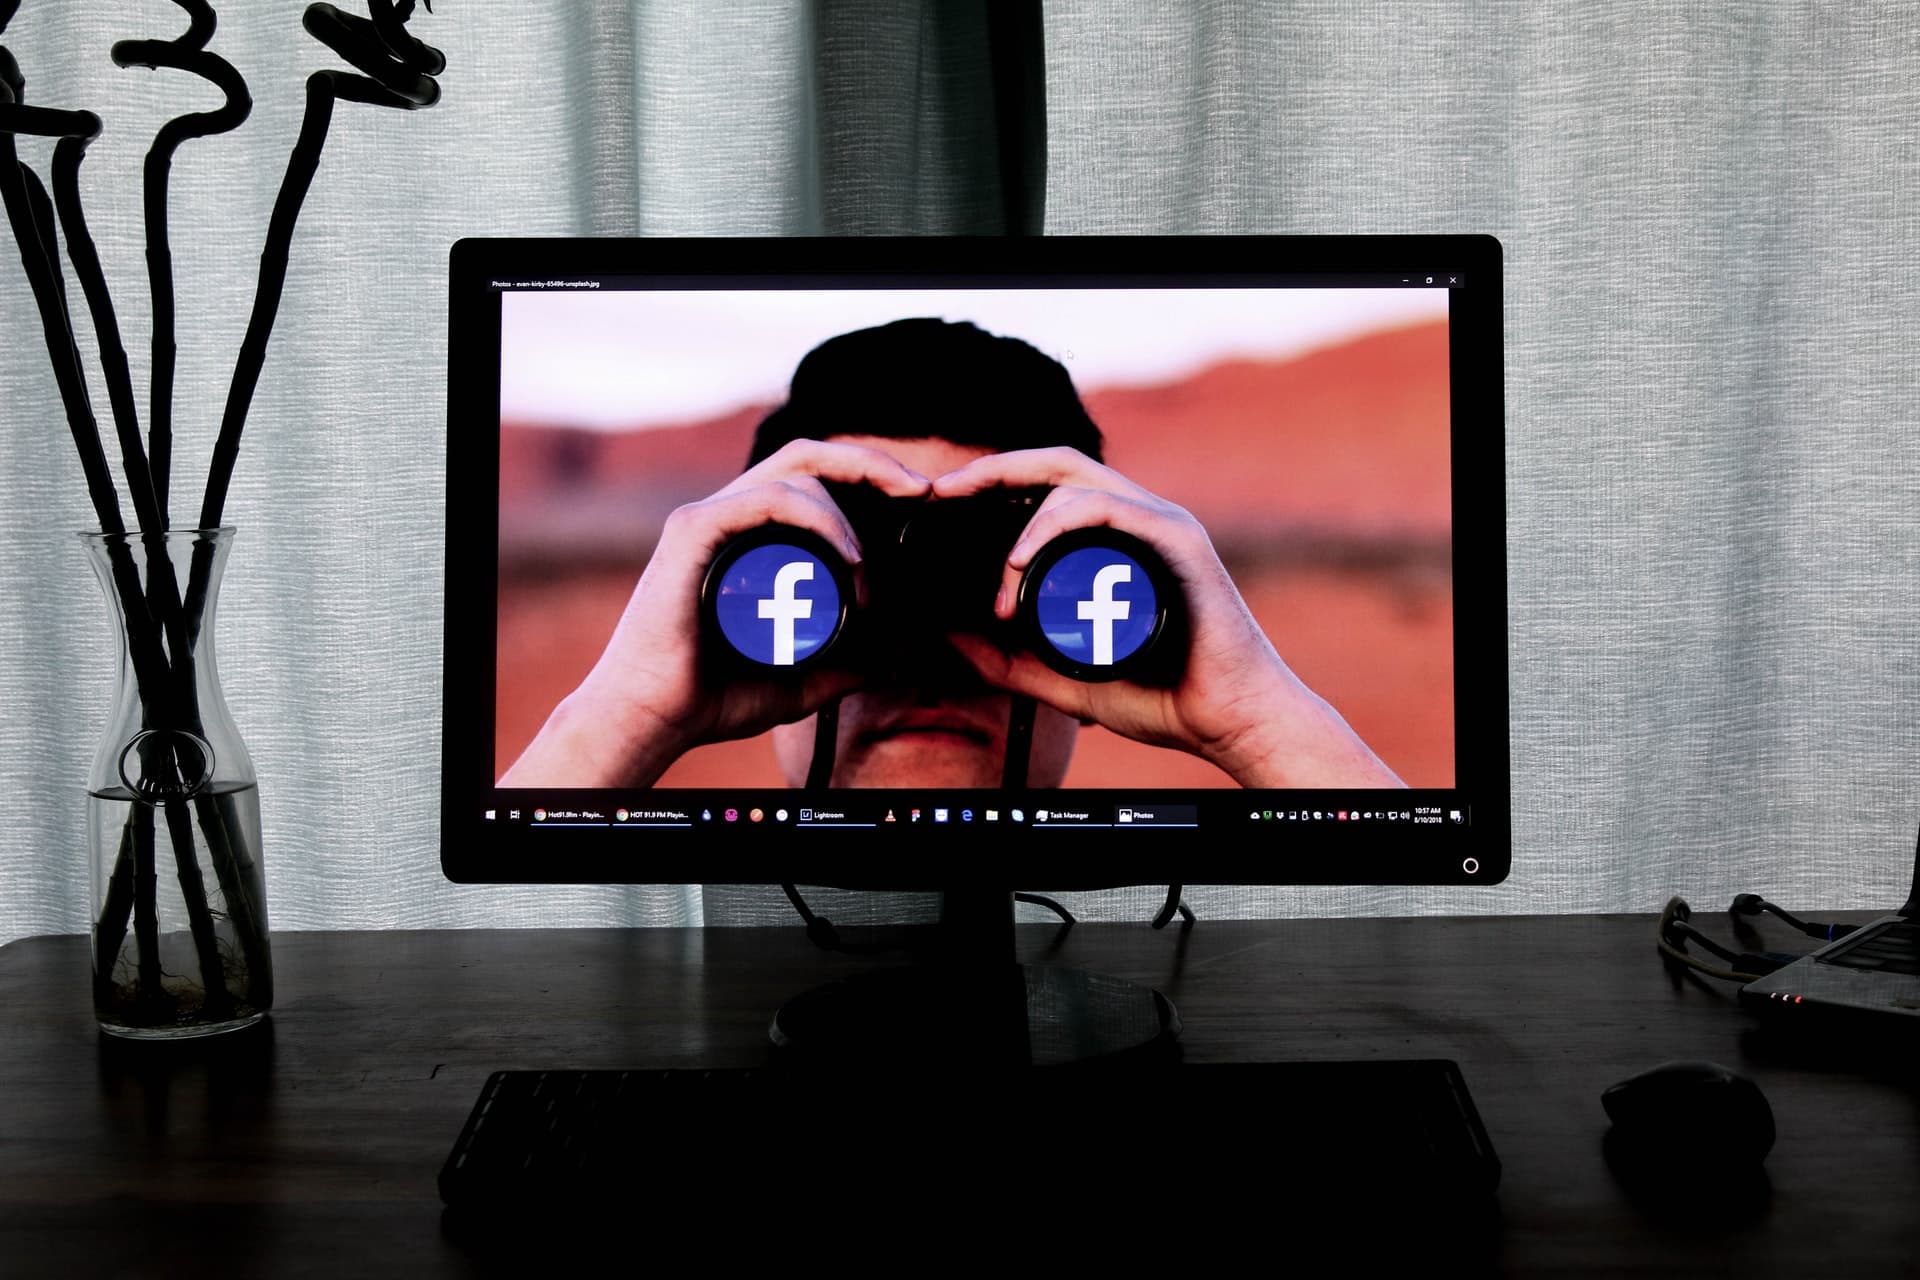 4 Facebook Video Metrics You Should Track to Measure Results